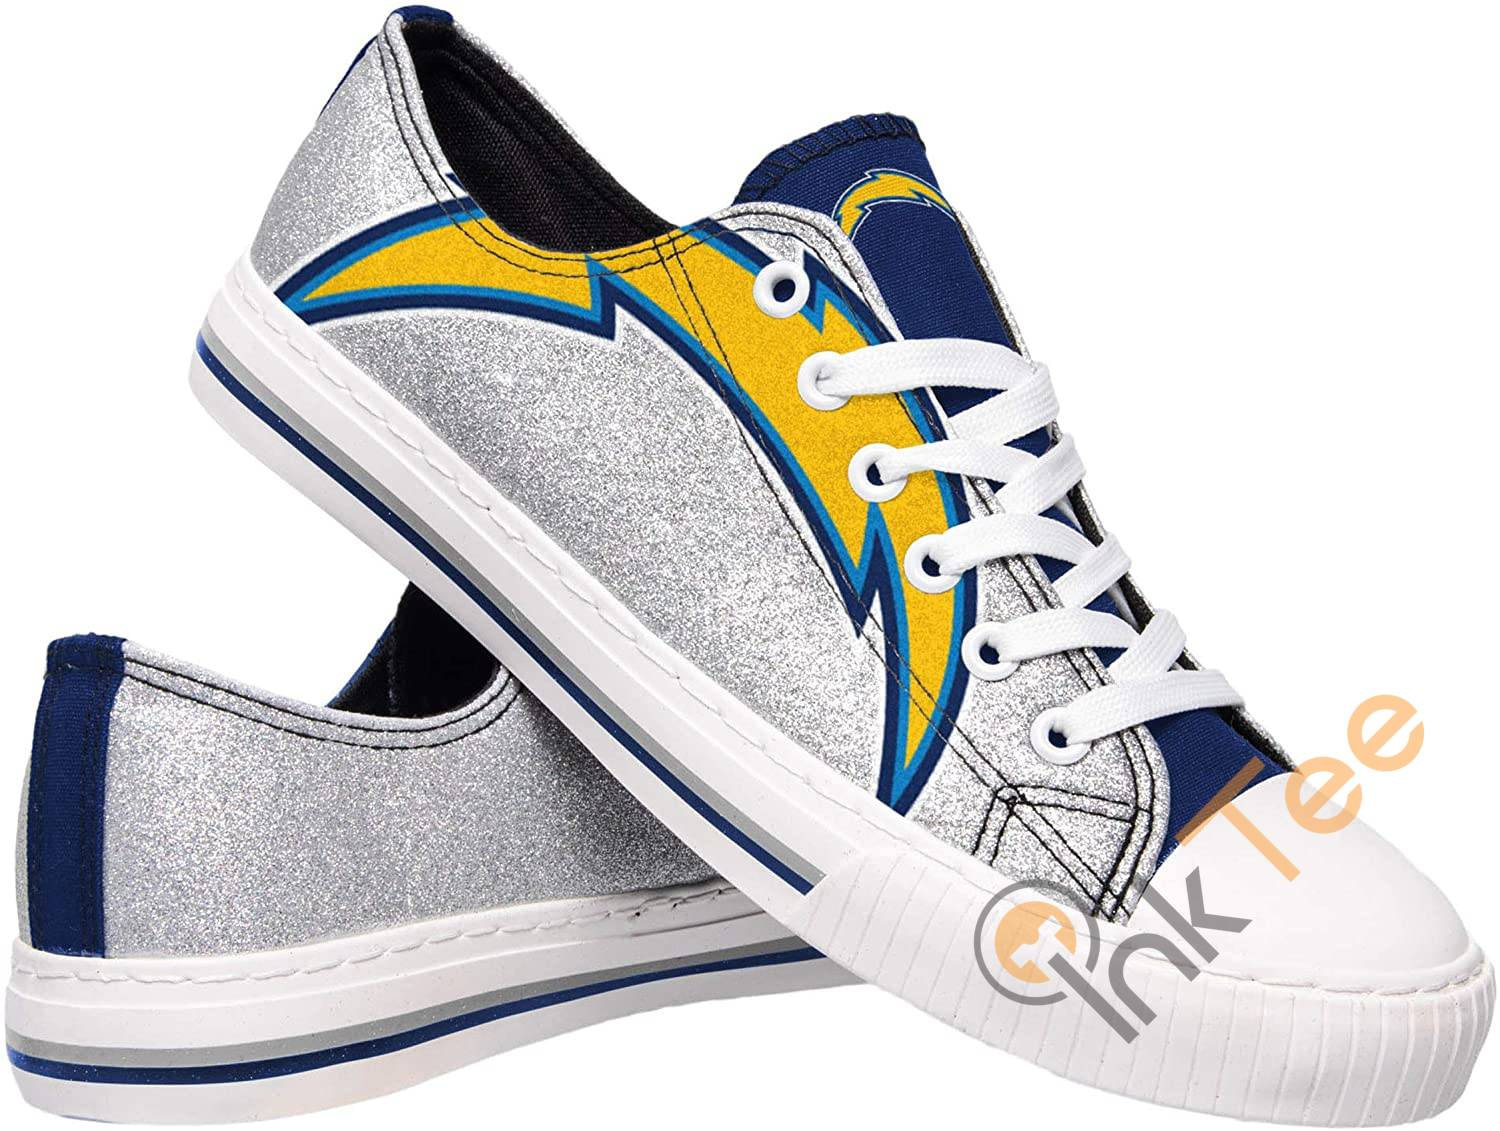 Nfl Los Angeles Chargers Team Low Top Sneakers